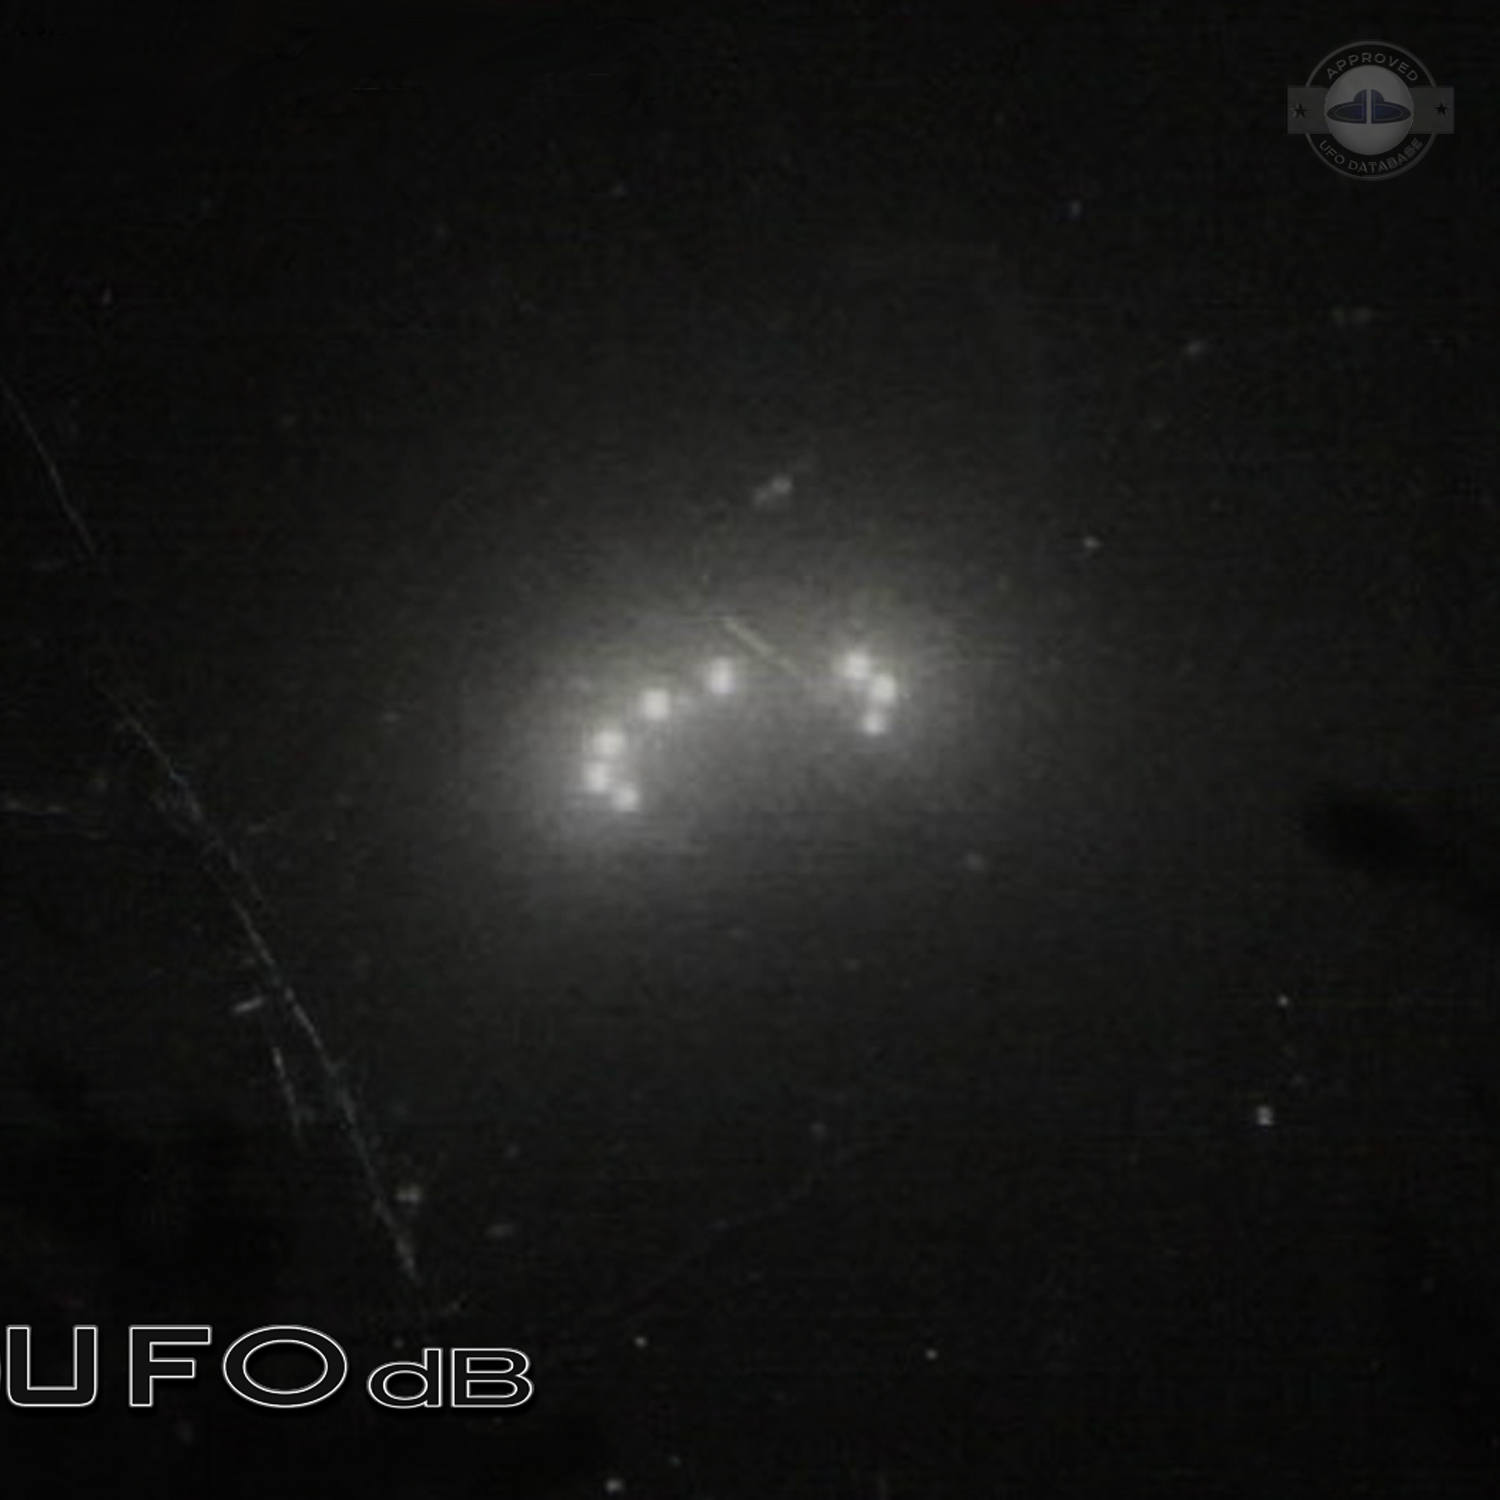 UFO picture was captured on a night exercise of Nationale Volksarmee UFO Picture #187-2